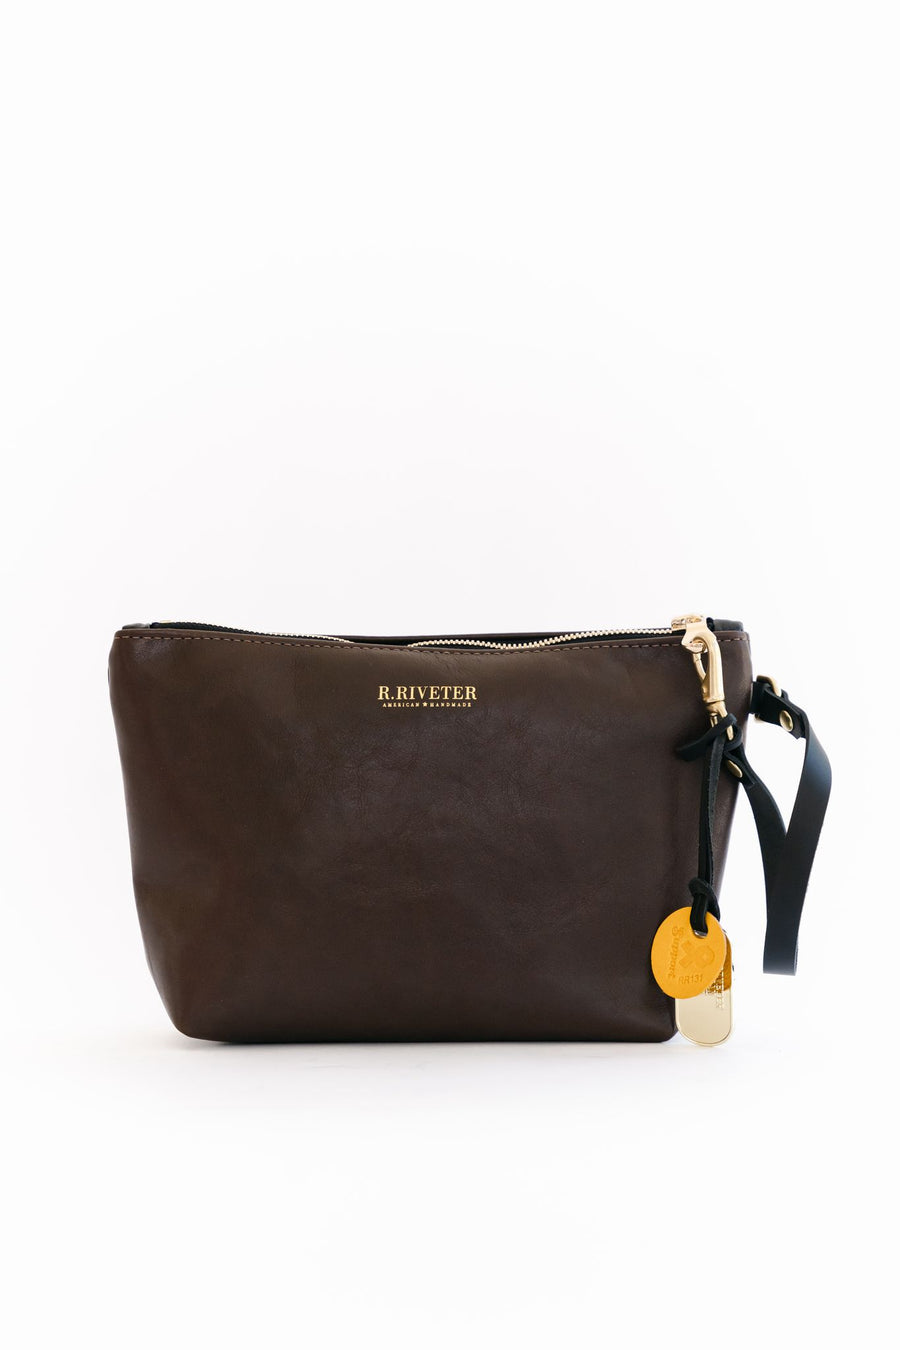 Leather Goods – R. Riveter